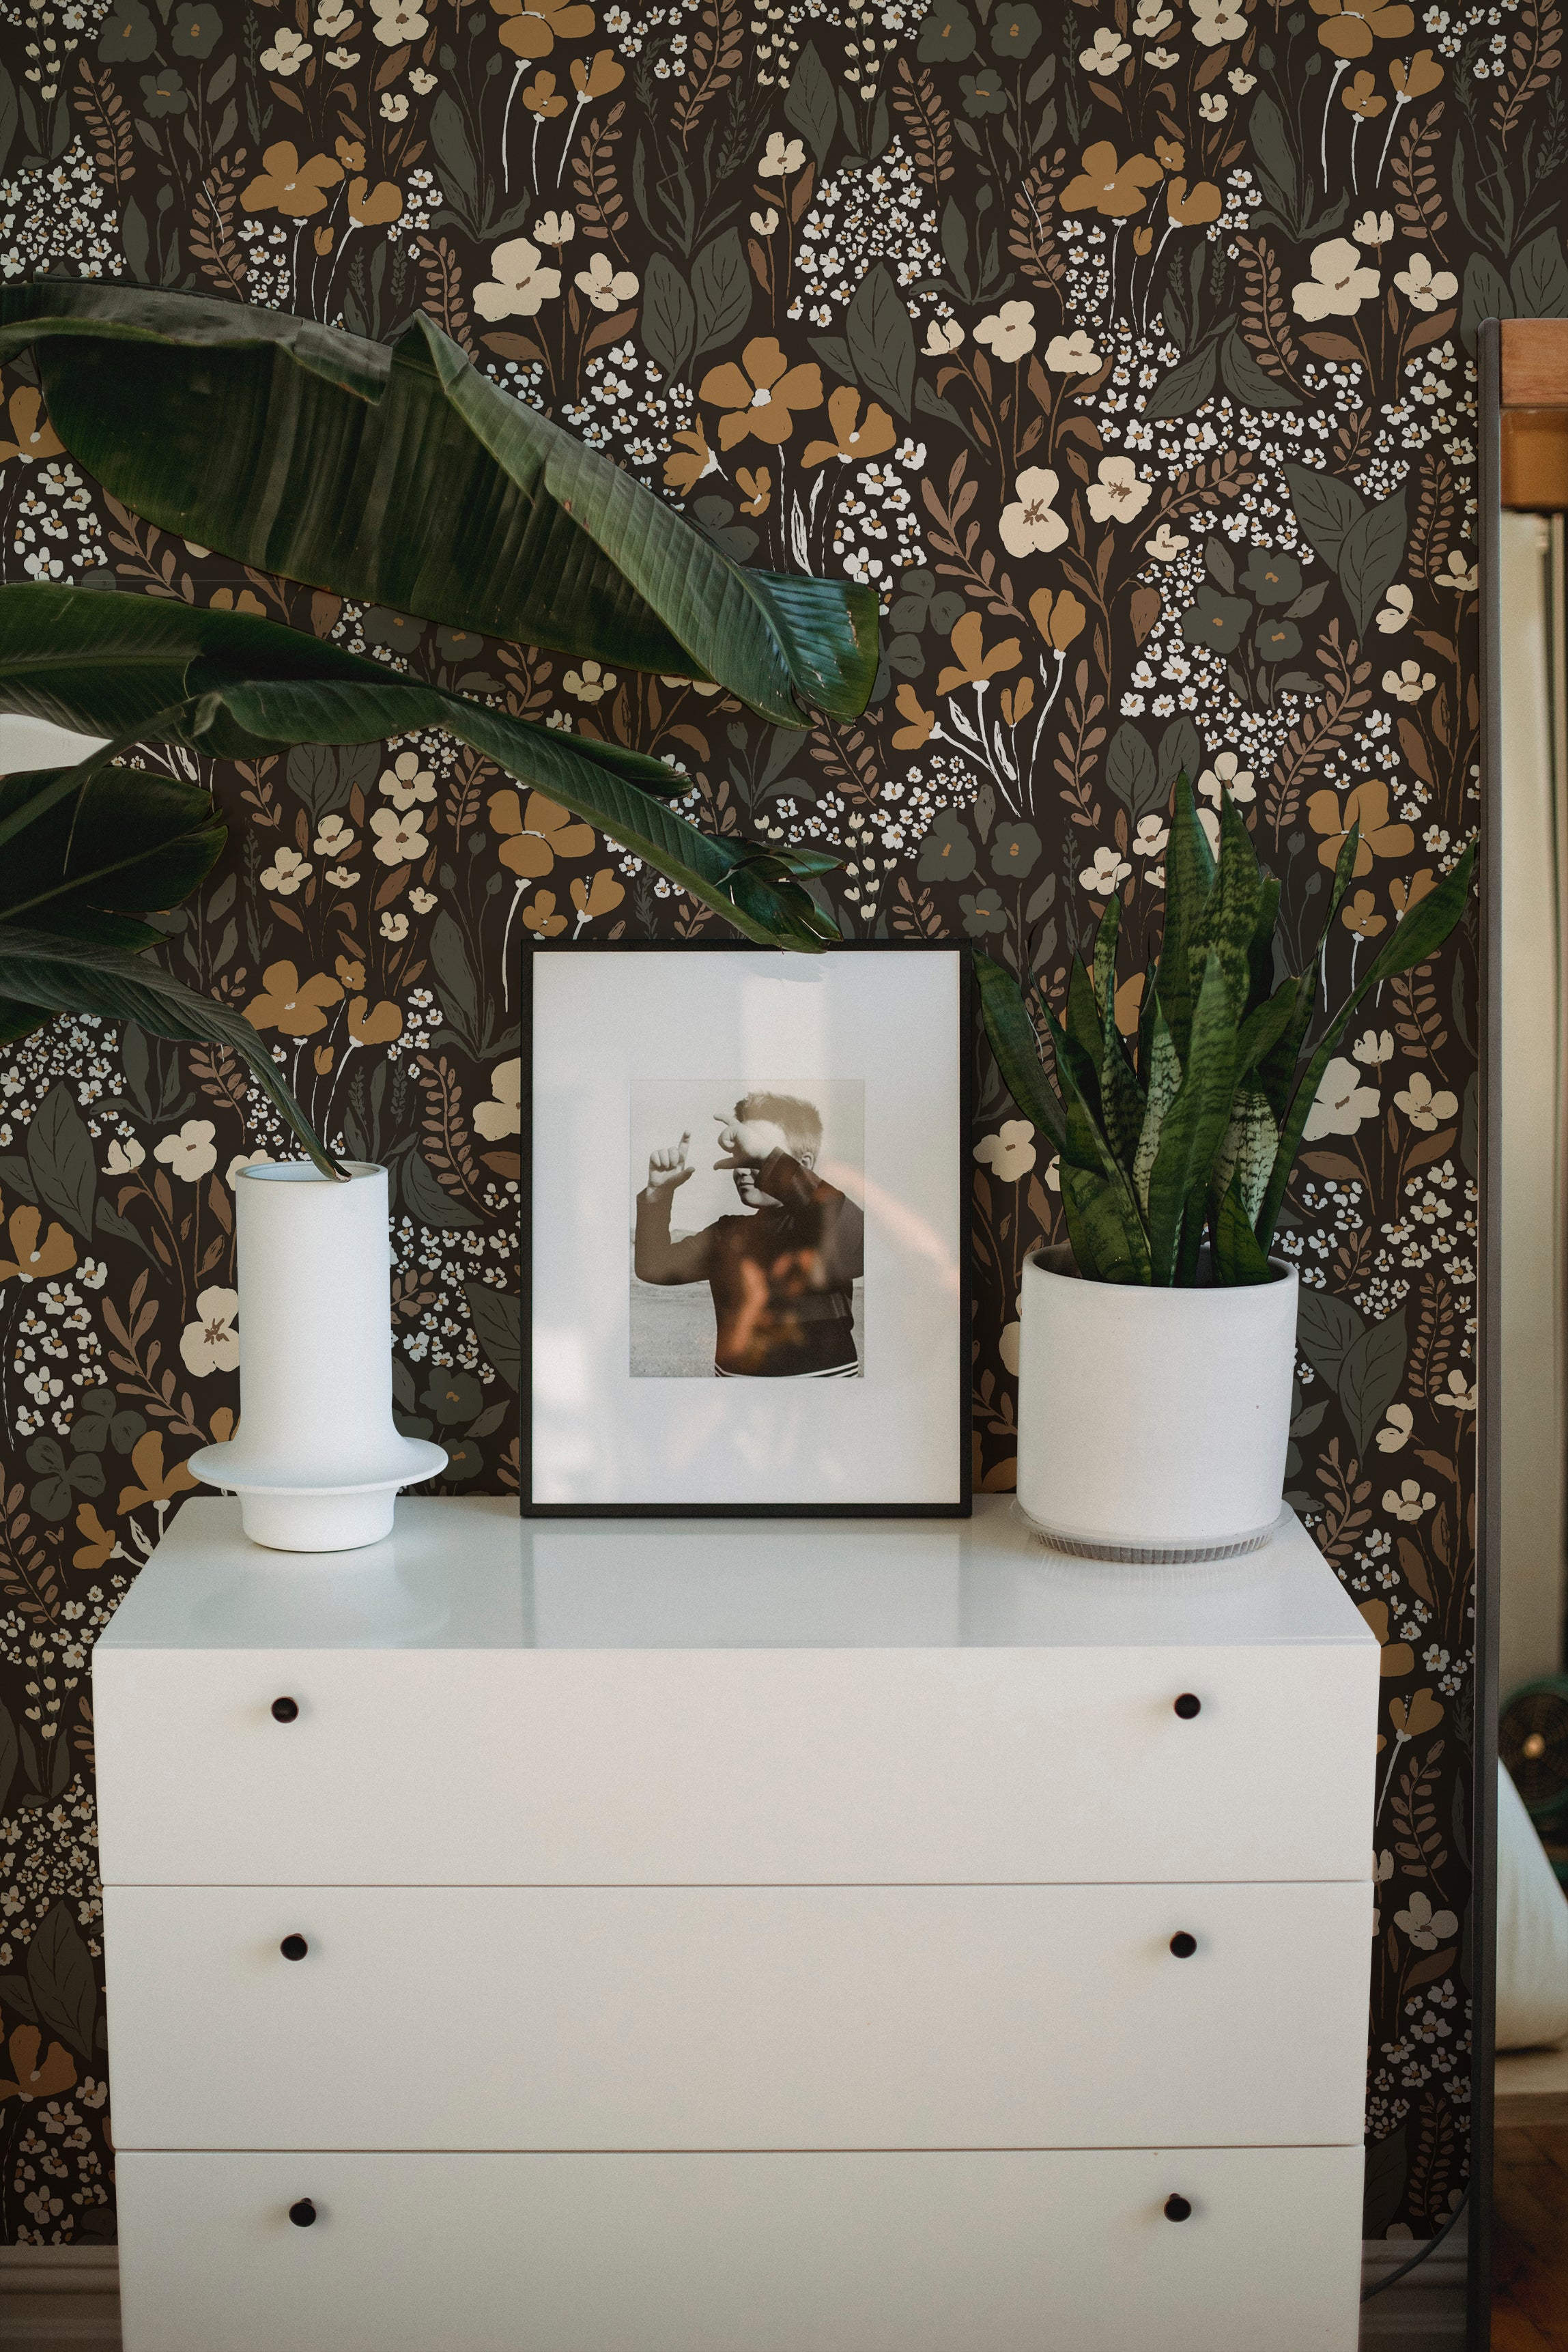 A modern dresser in white with a minimalistic design set against a botanical wallpaper backdrop with a dense floral pattern in dark brown, white, mustard, and green hues. The dresser is styled with a white candlestick, a framed photograph, and a potted snake plant, enhancing the room's organic elegance